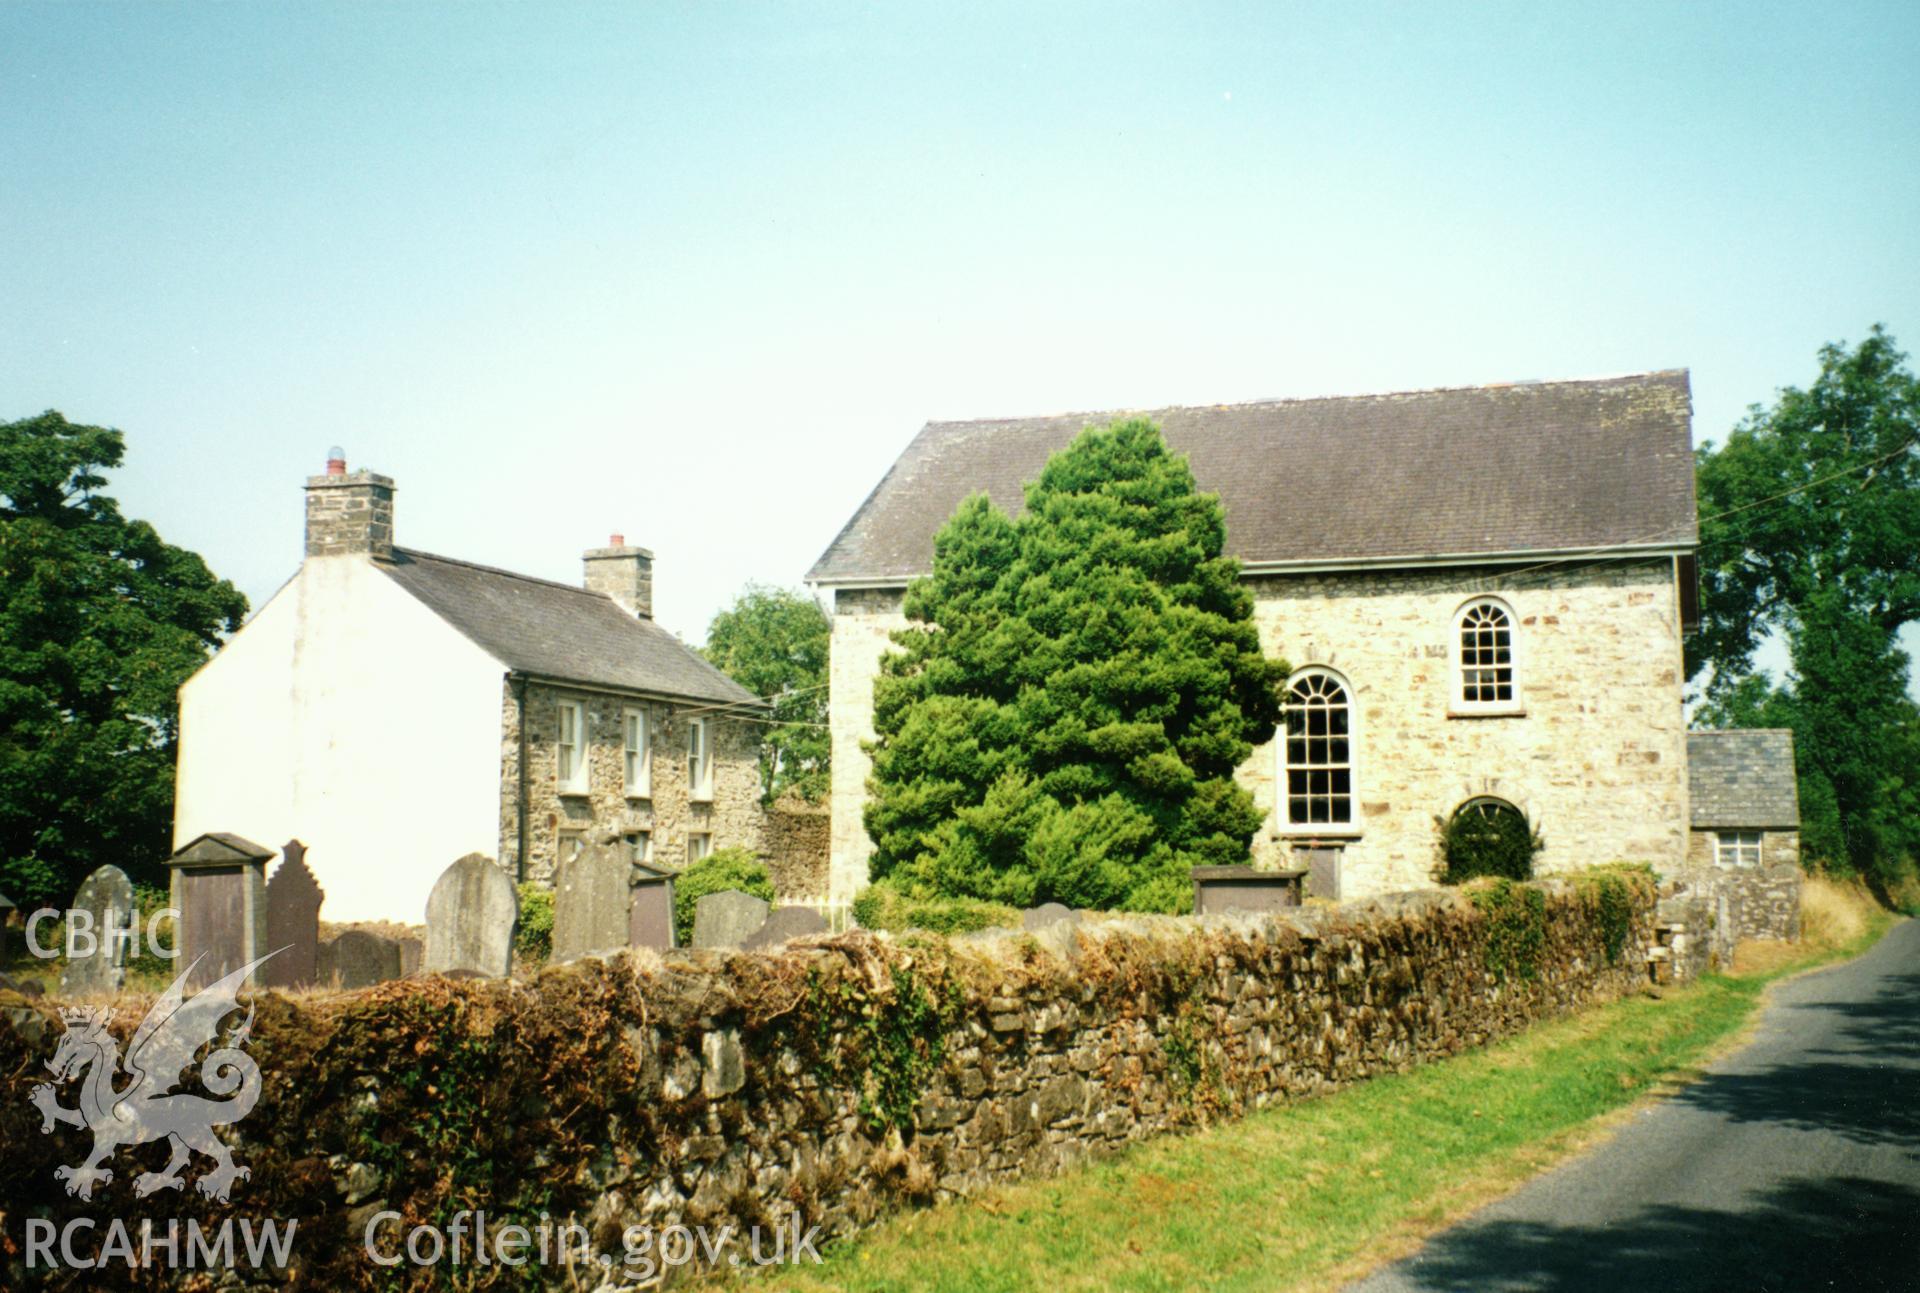 Digital copy of a colour photograph showing an exterior view of Pensarn Chapel, Caerwedros, taken by Robert Scourfield, c.1996.